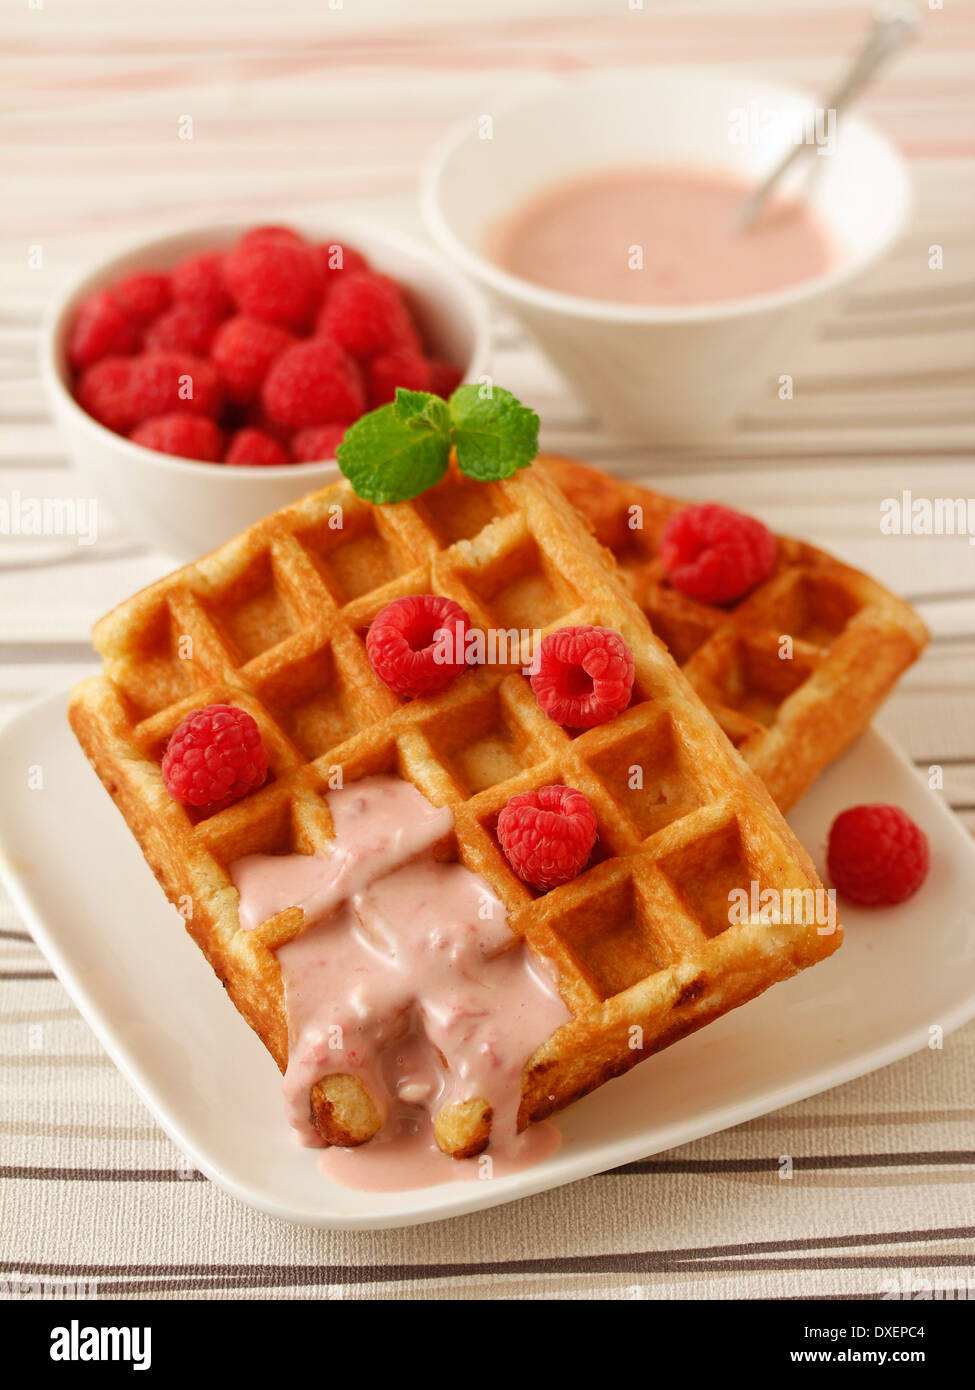 Waffles with raspberries smoothie. Recipe available. Stock Photo